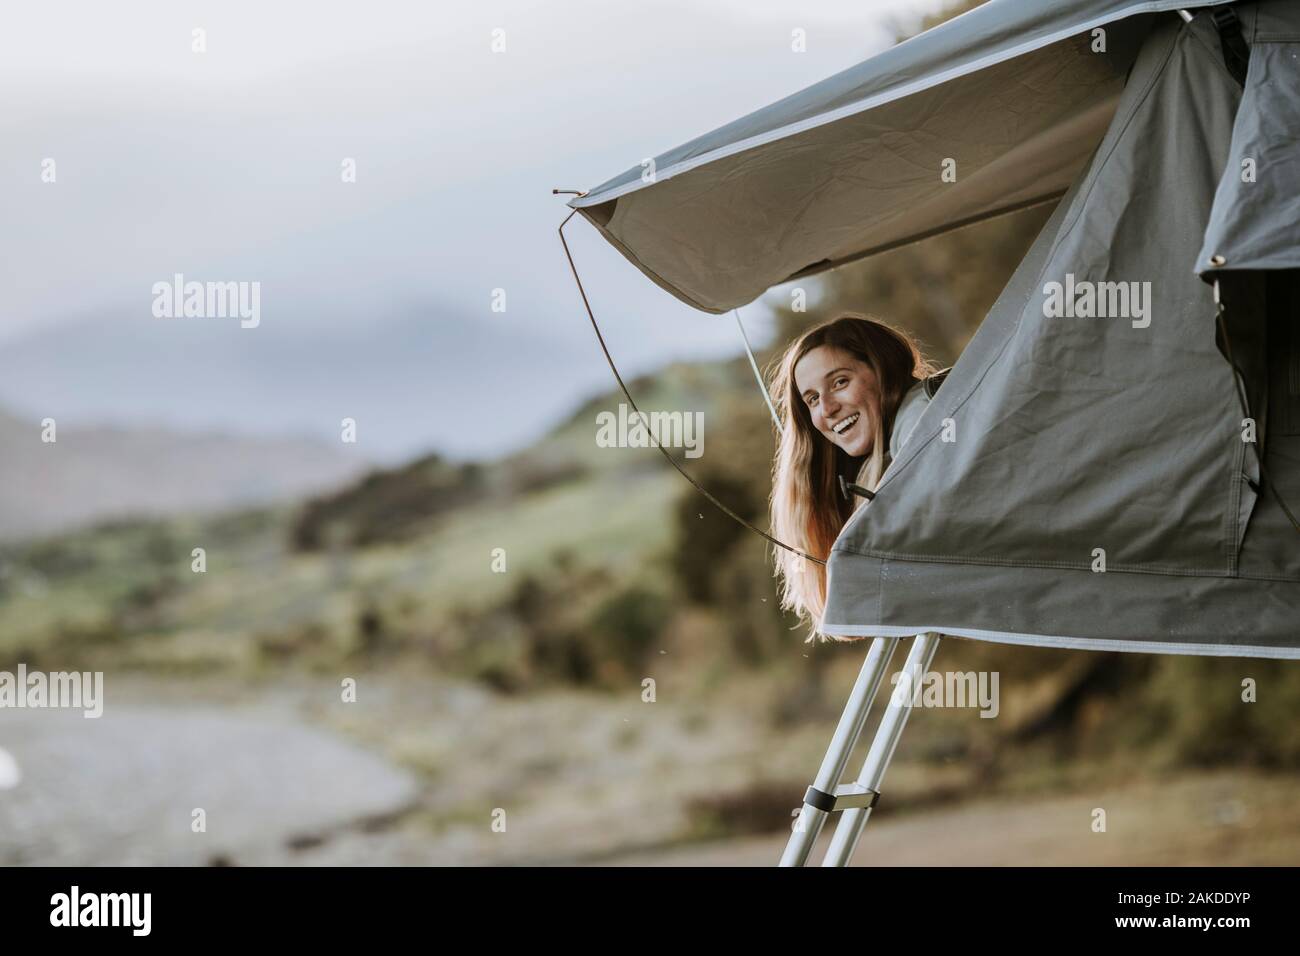 A young smiling woman sticks her head out of a tent in New Zealand. Stock Photo